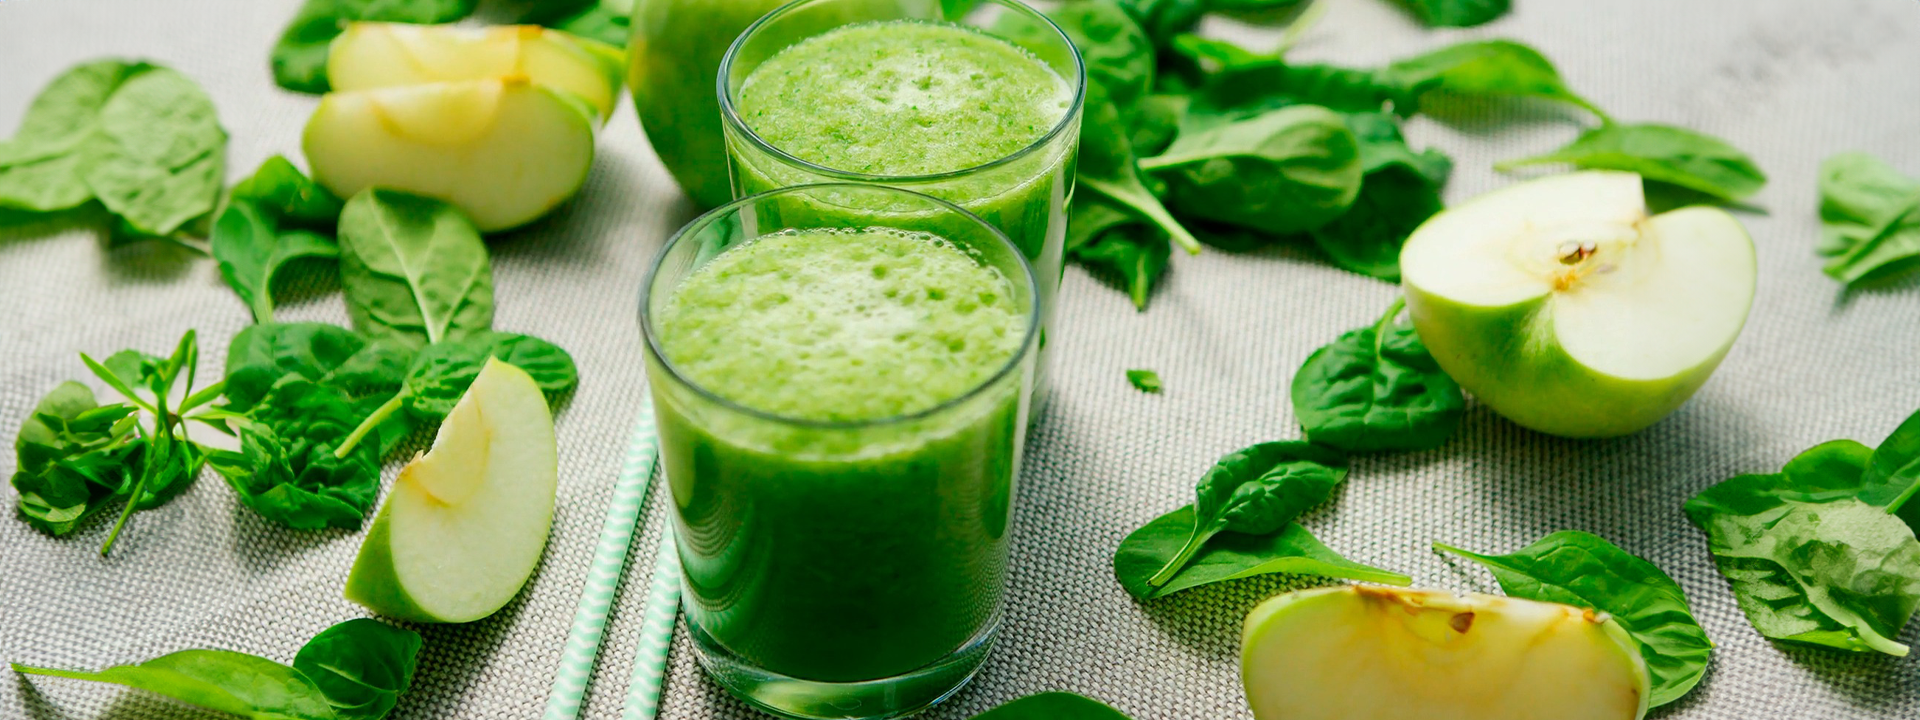 Pros and Cons of Juice Cleansing